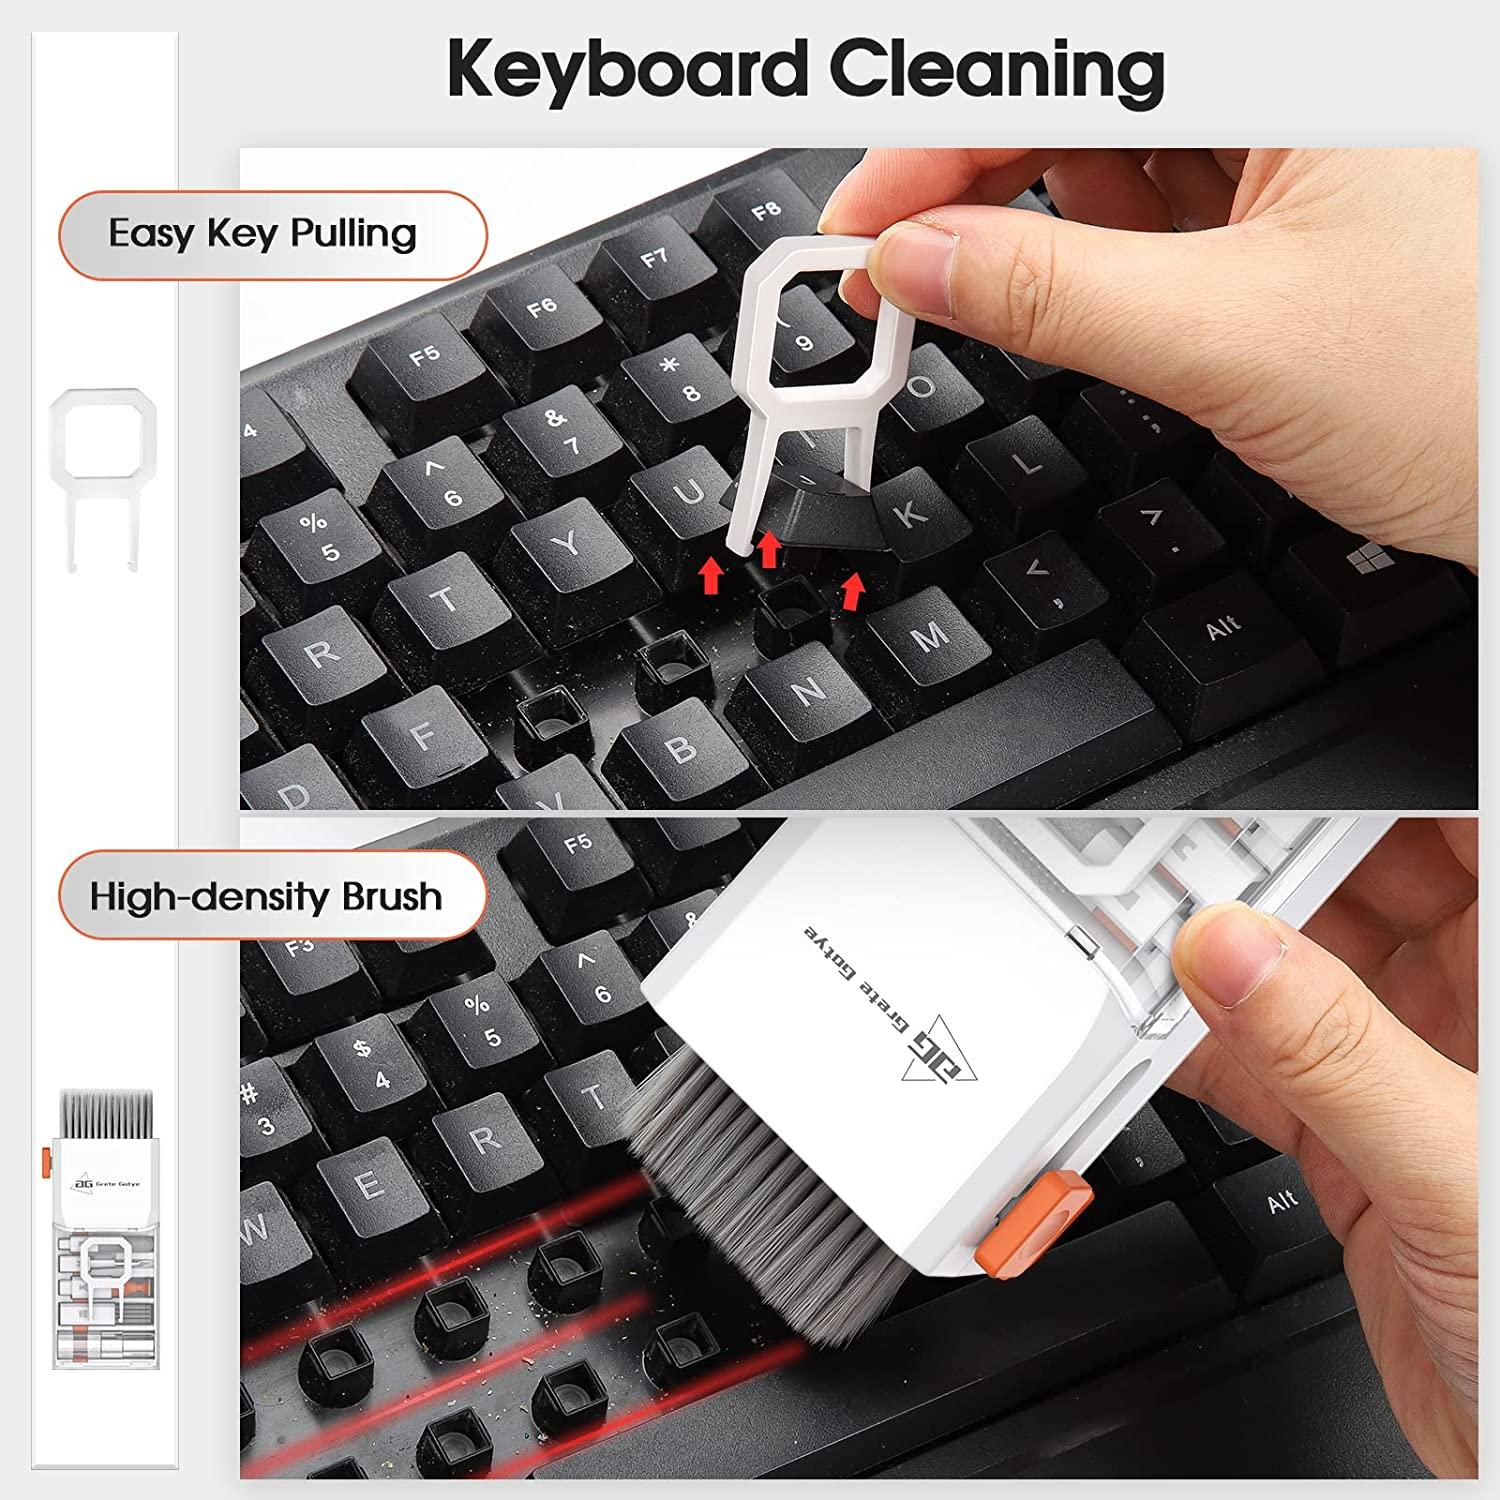 7-in-1 Electronics Cleaner Kit - Keyboard Cleaner Kit Portable  Multifunctional Cleaning Tool For Pc Monitor/earbud/cell  Phone/laptop/computer/bluetoo